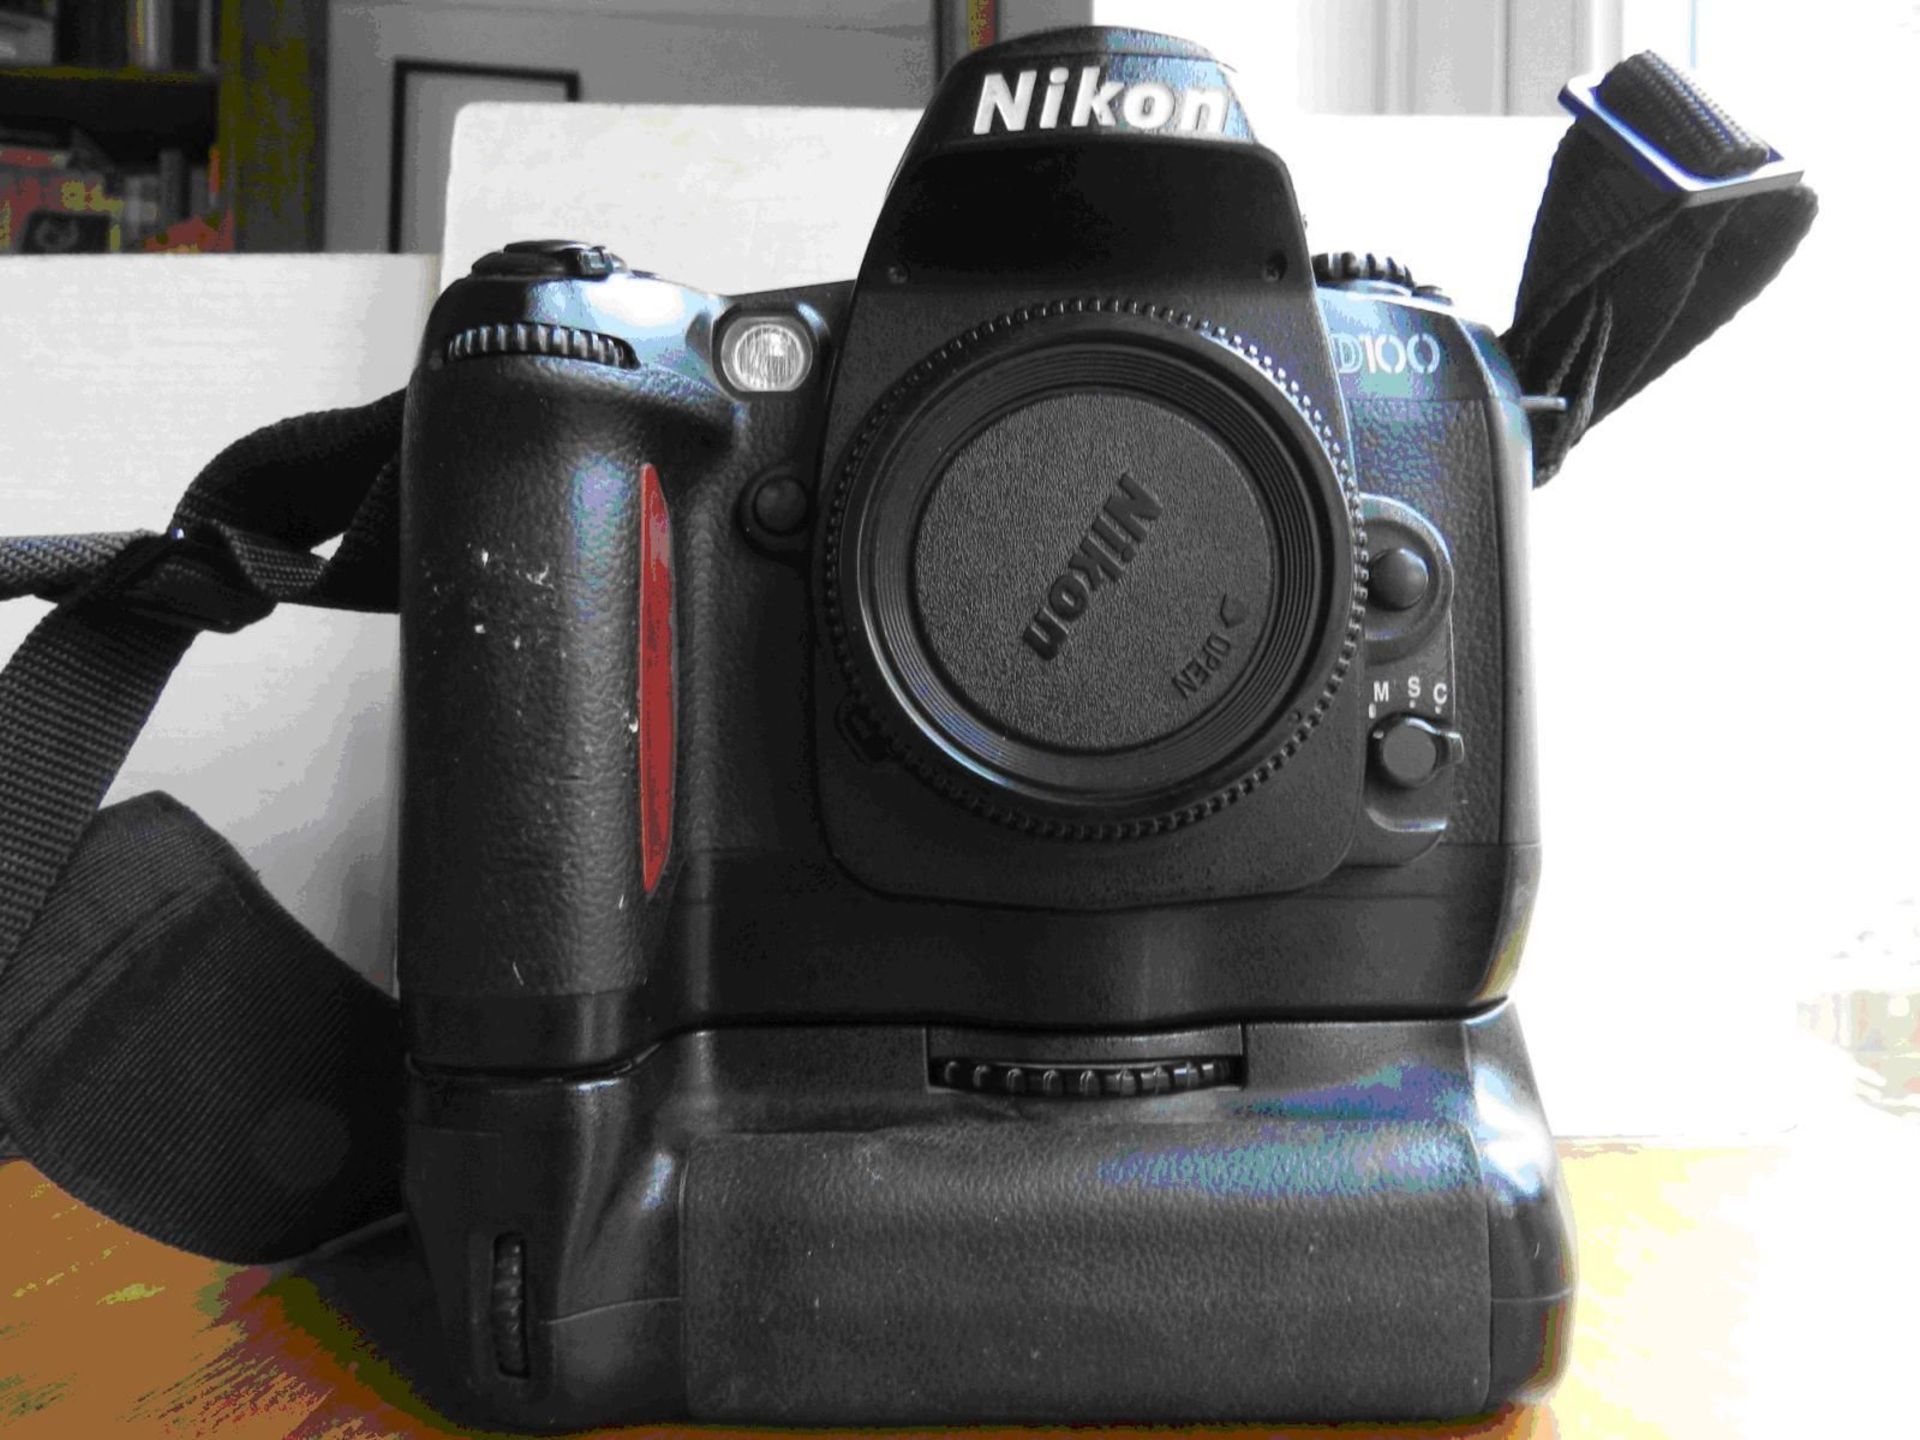 Nikon D100 CAMERA , NO LENS JUST BODY AS PICTURE , THIS PRODUCT HAS NOT BEEN TESTED.